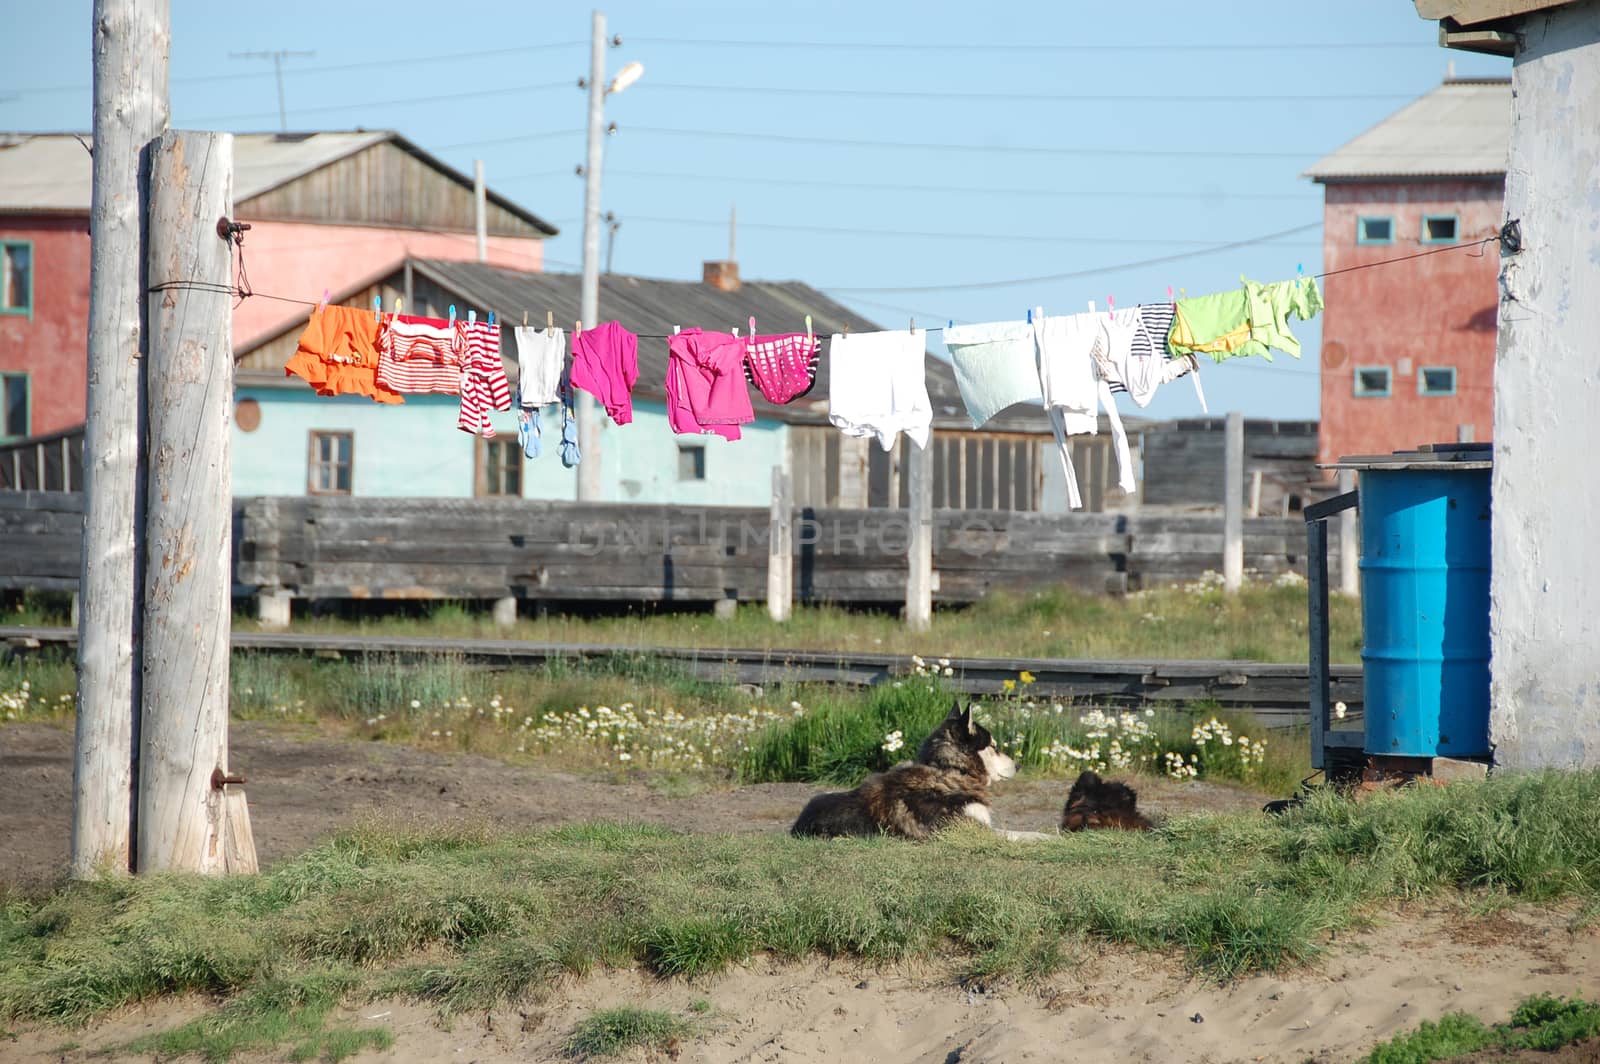 Dog under clothes drying on line by danemo